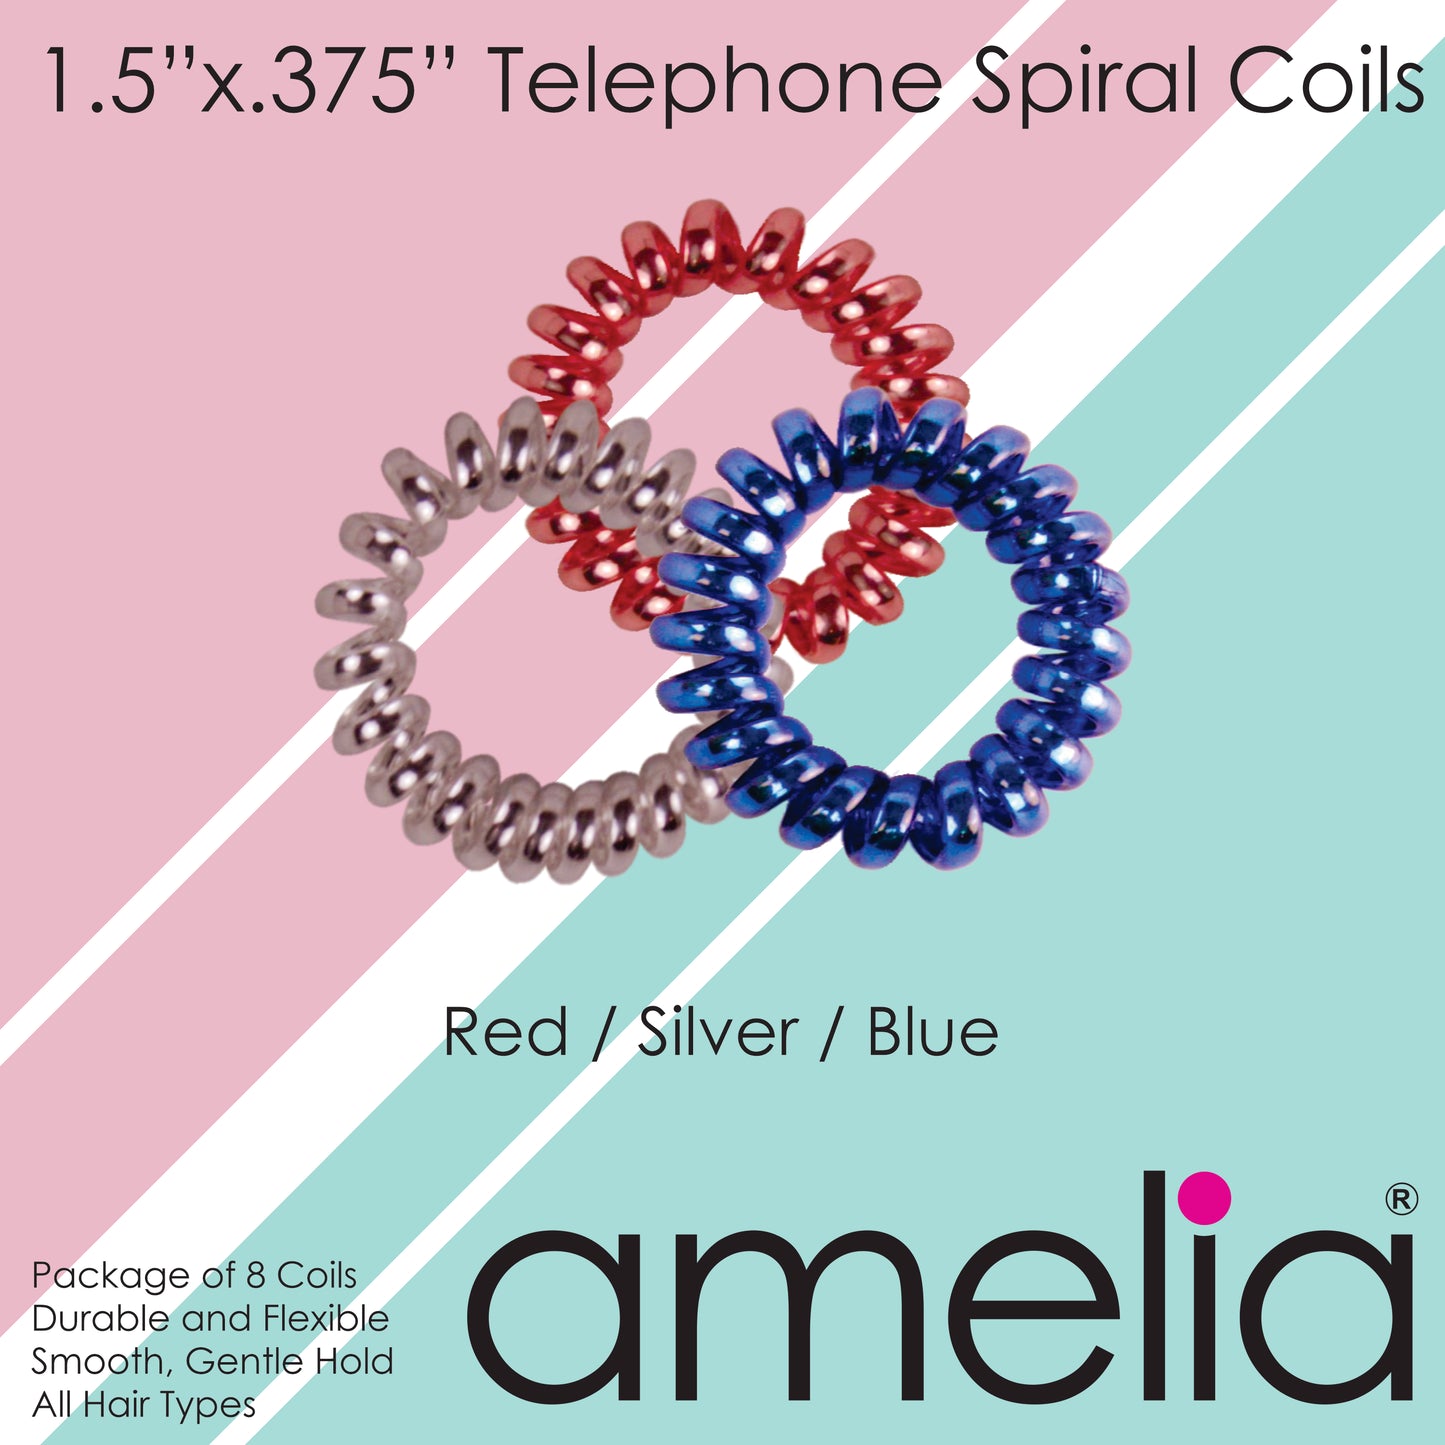 Amelia Beauty, 8 Small Shinny Elastic Hair Telephone Cord Coils, 1.5in Diameter Spiral Hair Ties, Strong Hold, Gentle on Hair, Red, Silver and Blue